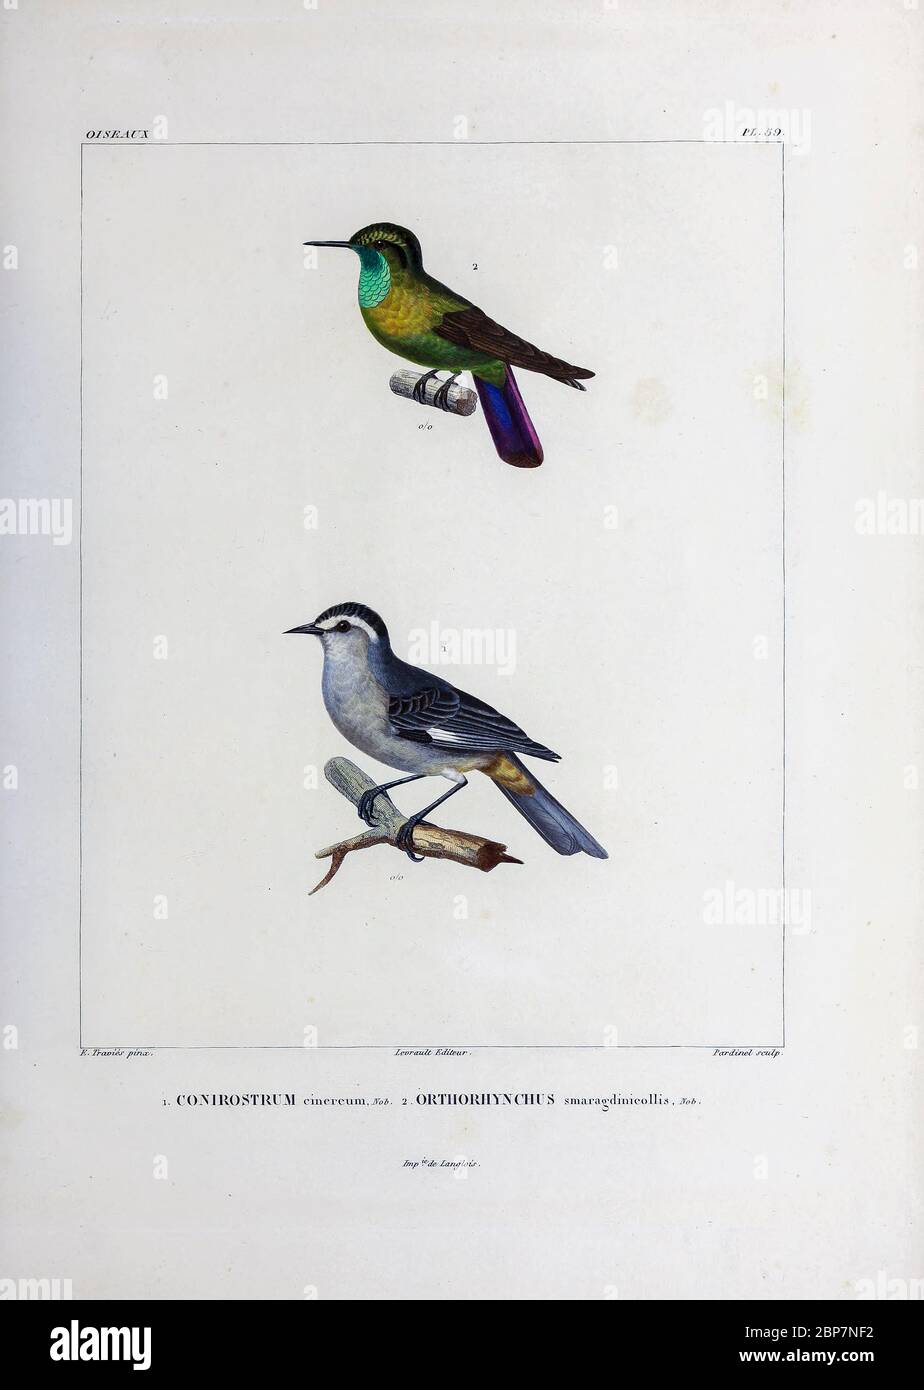 hand coloured sketch Top: Subspecies of Tyrian Metaltail (Metallura tyrianthina smaragdinicollis [Here as Orthorhynchus smaragdinicollis]) Bottom: cinereous conebill (Conirostrum cinereum) From the book 'Voyage dans l'Amérique Méridionale' [Journey to South America: (Brazil, the eastern republic of Uruguay, the Argentine Republic, Patagonia, the republic of Chile, the republic of Bolivia, the republic of Peru), executed during the years 1826 - 1833] 4th volume Part 3 By: Orbigny, Alcide Dessalines d', d'Orbigny, 1802-1857; Montagne, Jean François Camille, 1784-1866; Martius, Karl Friedrich Ph Stock Photo